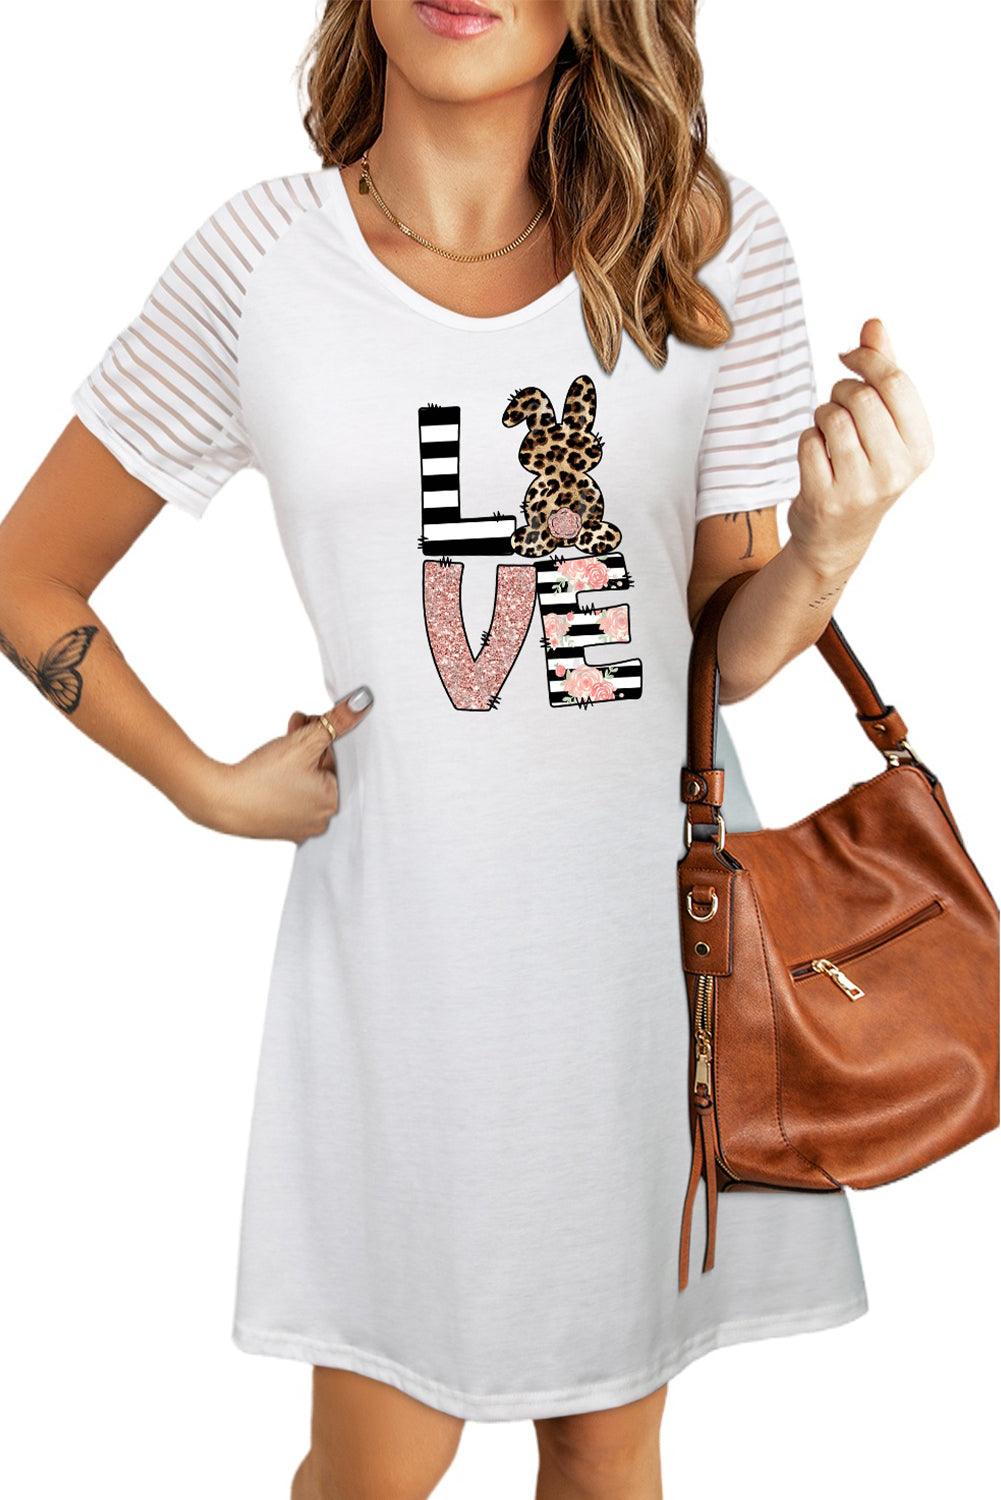 Easter Graphic Sheer Striped T-Shirt Dress - Flyclothing LLC